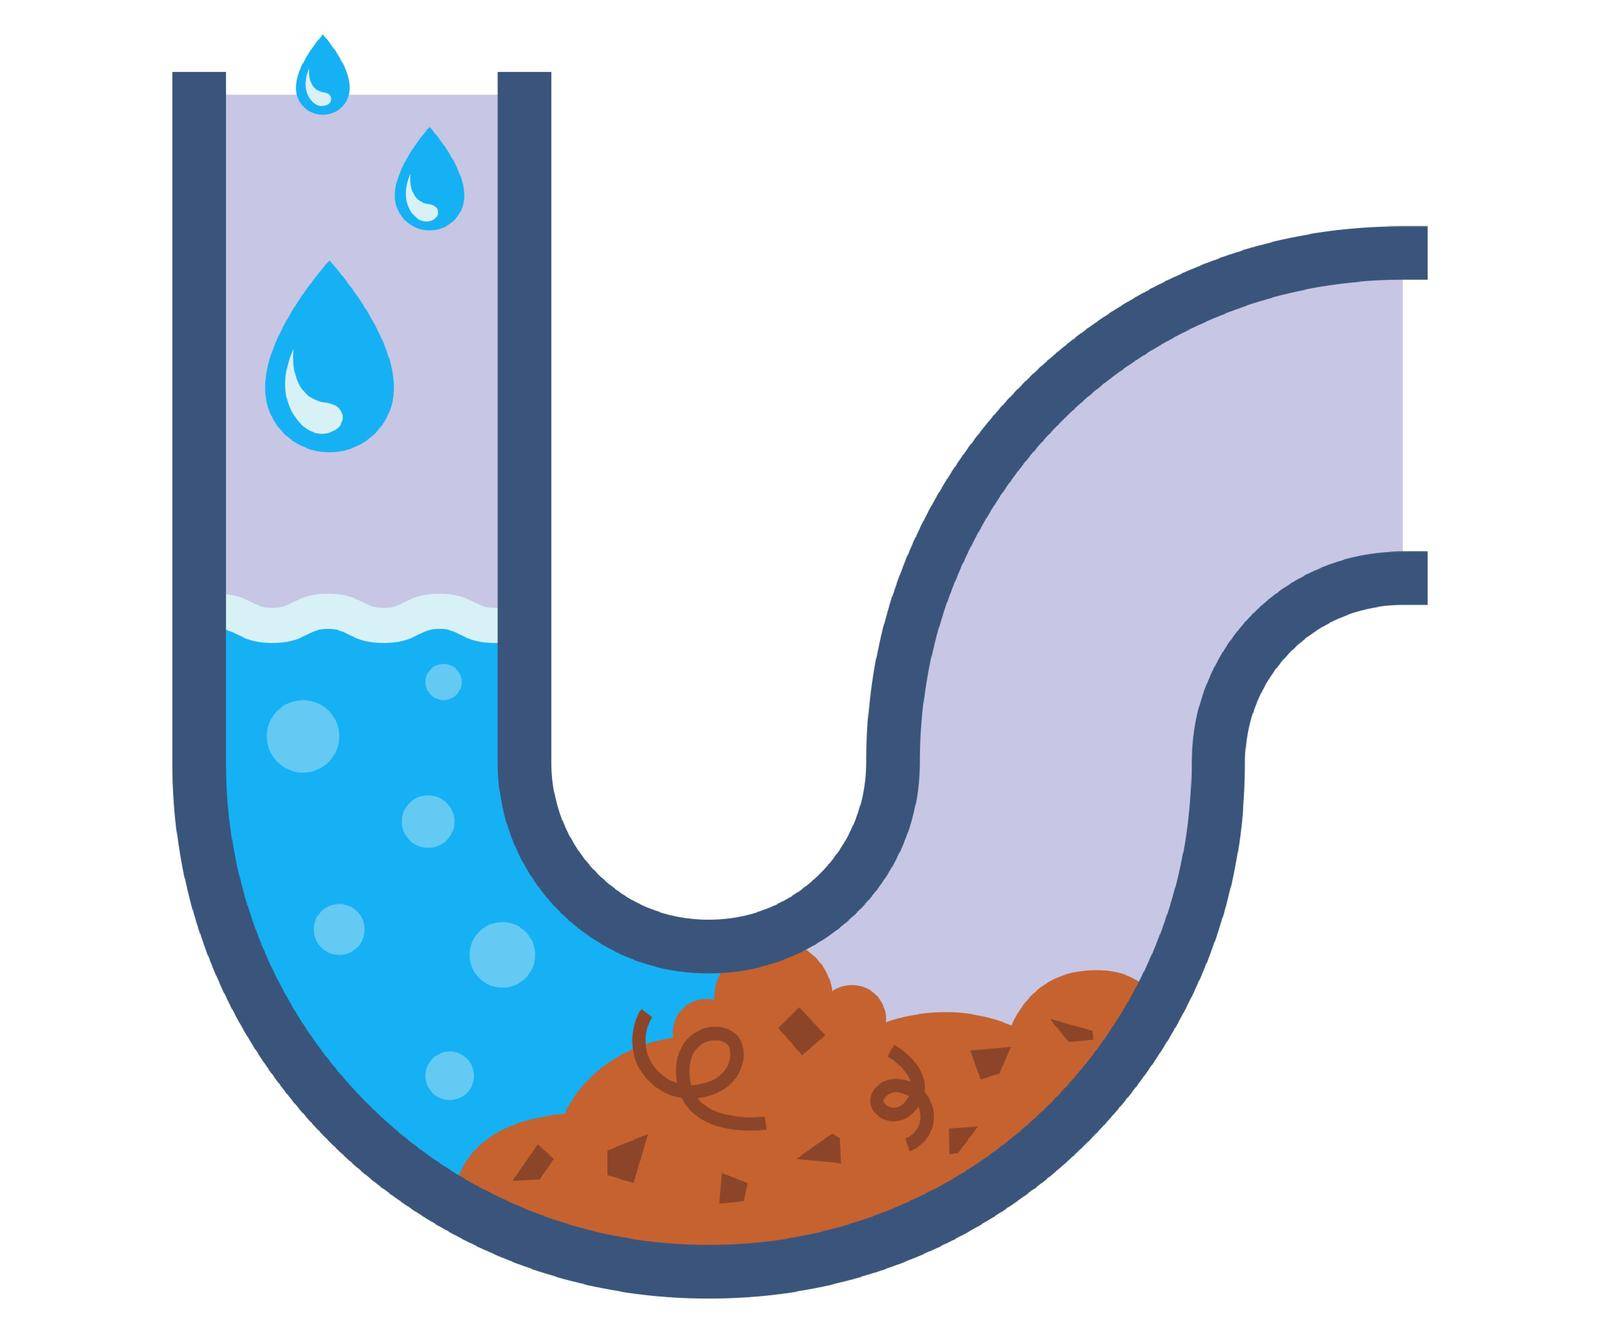 clogged pipes in the bathroom. water stagnation. flat vector illustration.